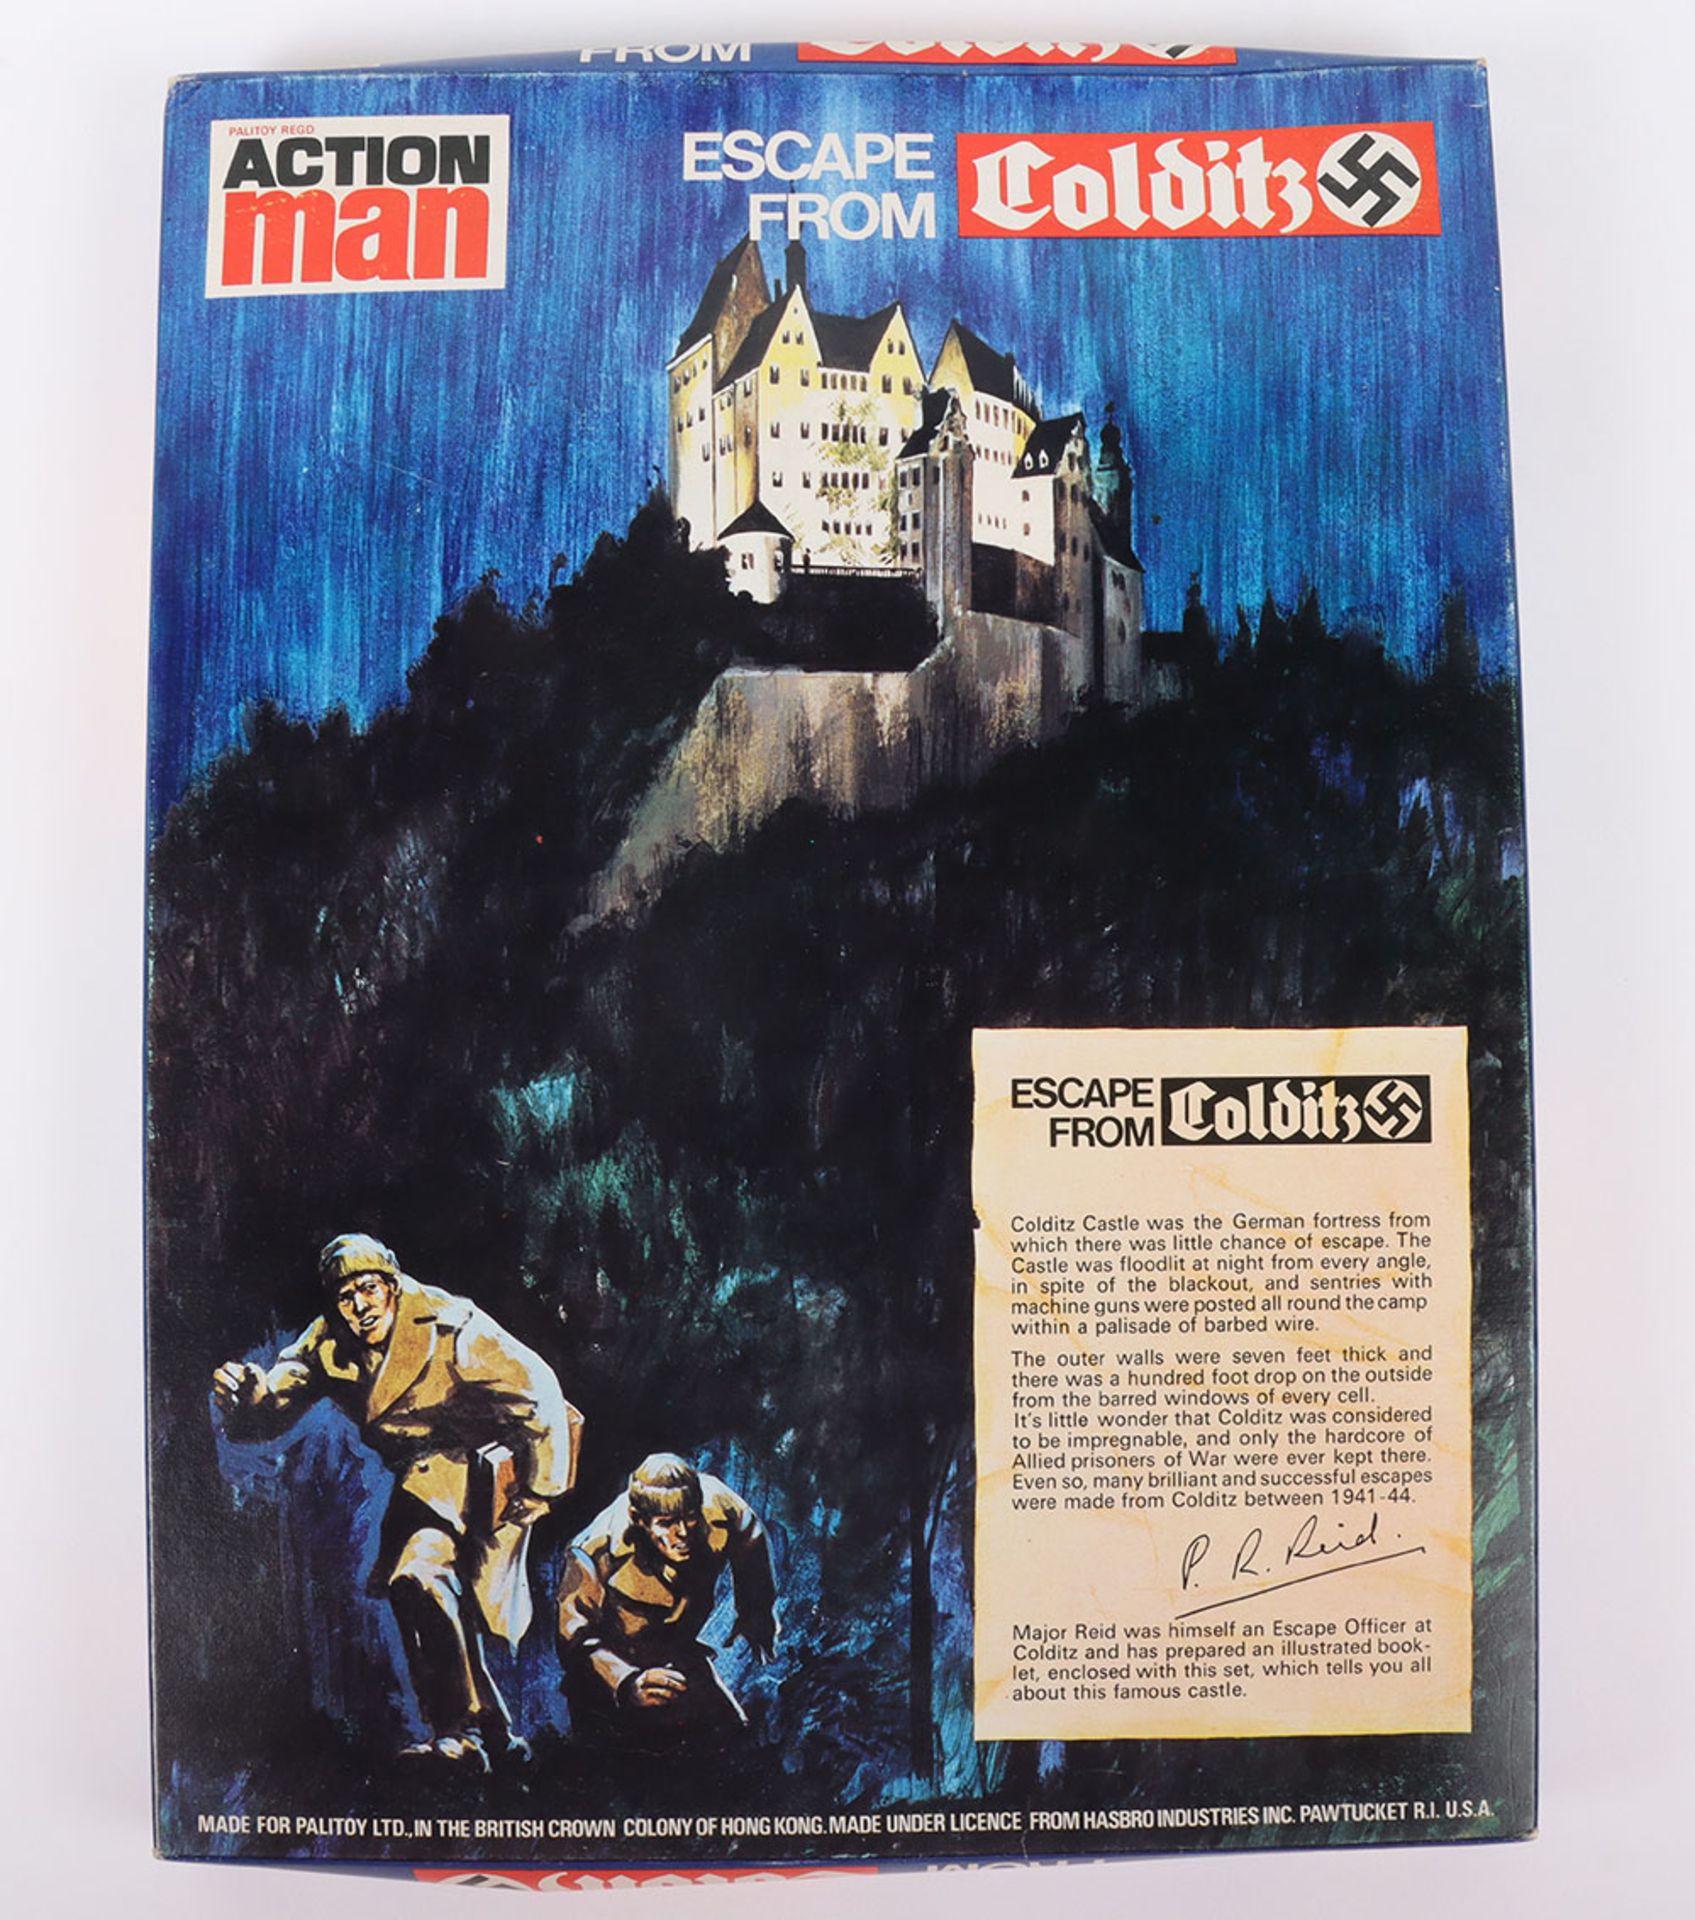 Palitoy Action Man Escape From Colditz Escape Officer circa 1970 - Image 2 of 4